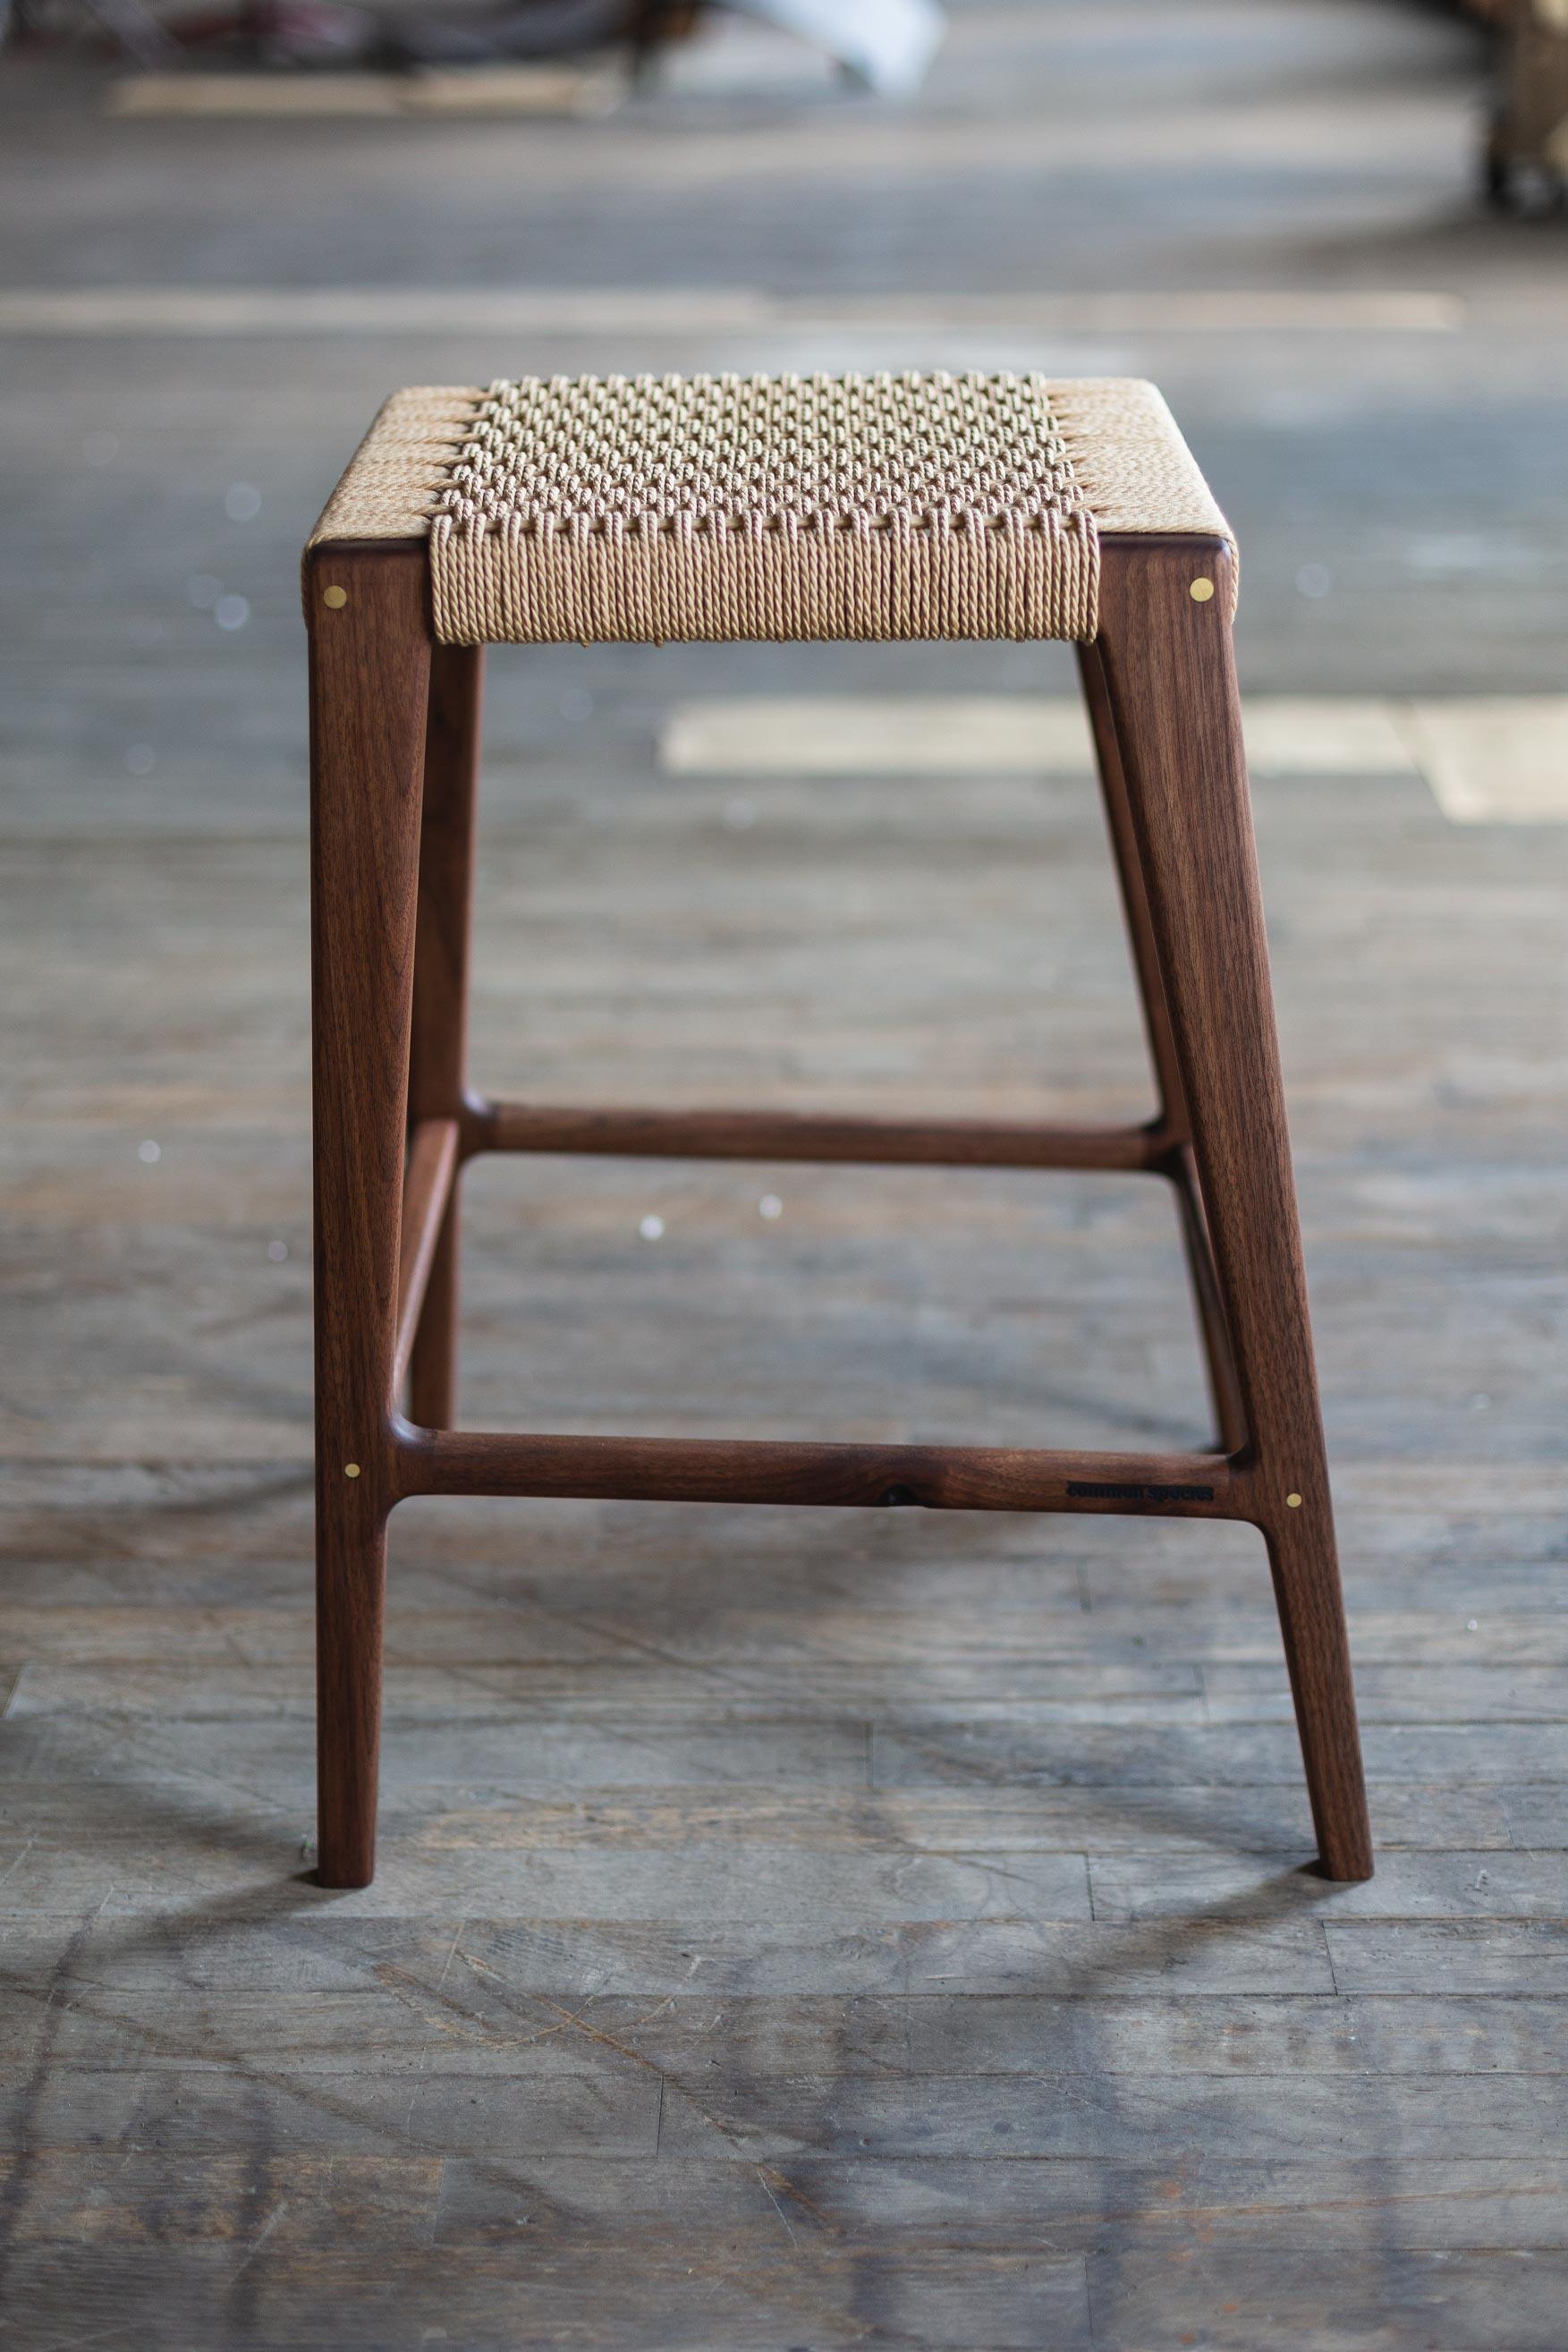 Clean, modern angles complimented by the warm texture of the Danish cord. The Travis stool can be made counter-height or bar-height and with an optional back.

All wood construction and joinery.